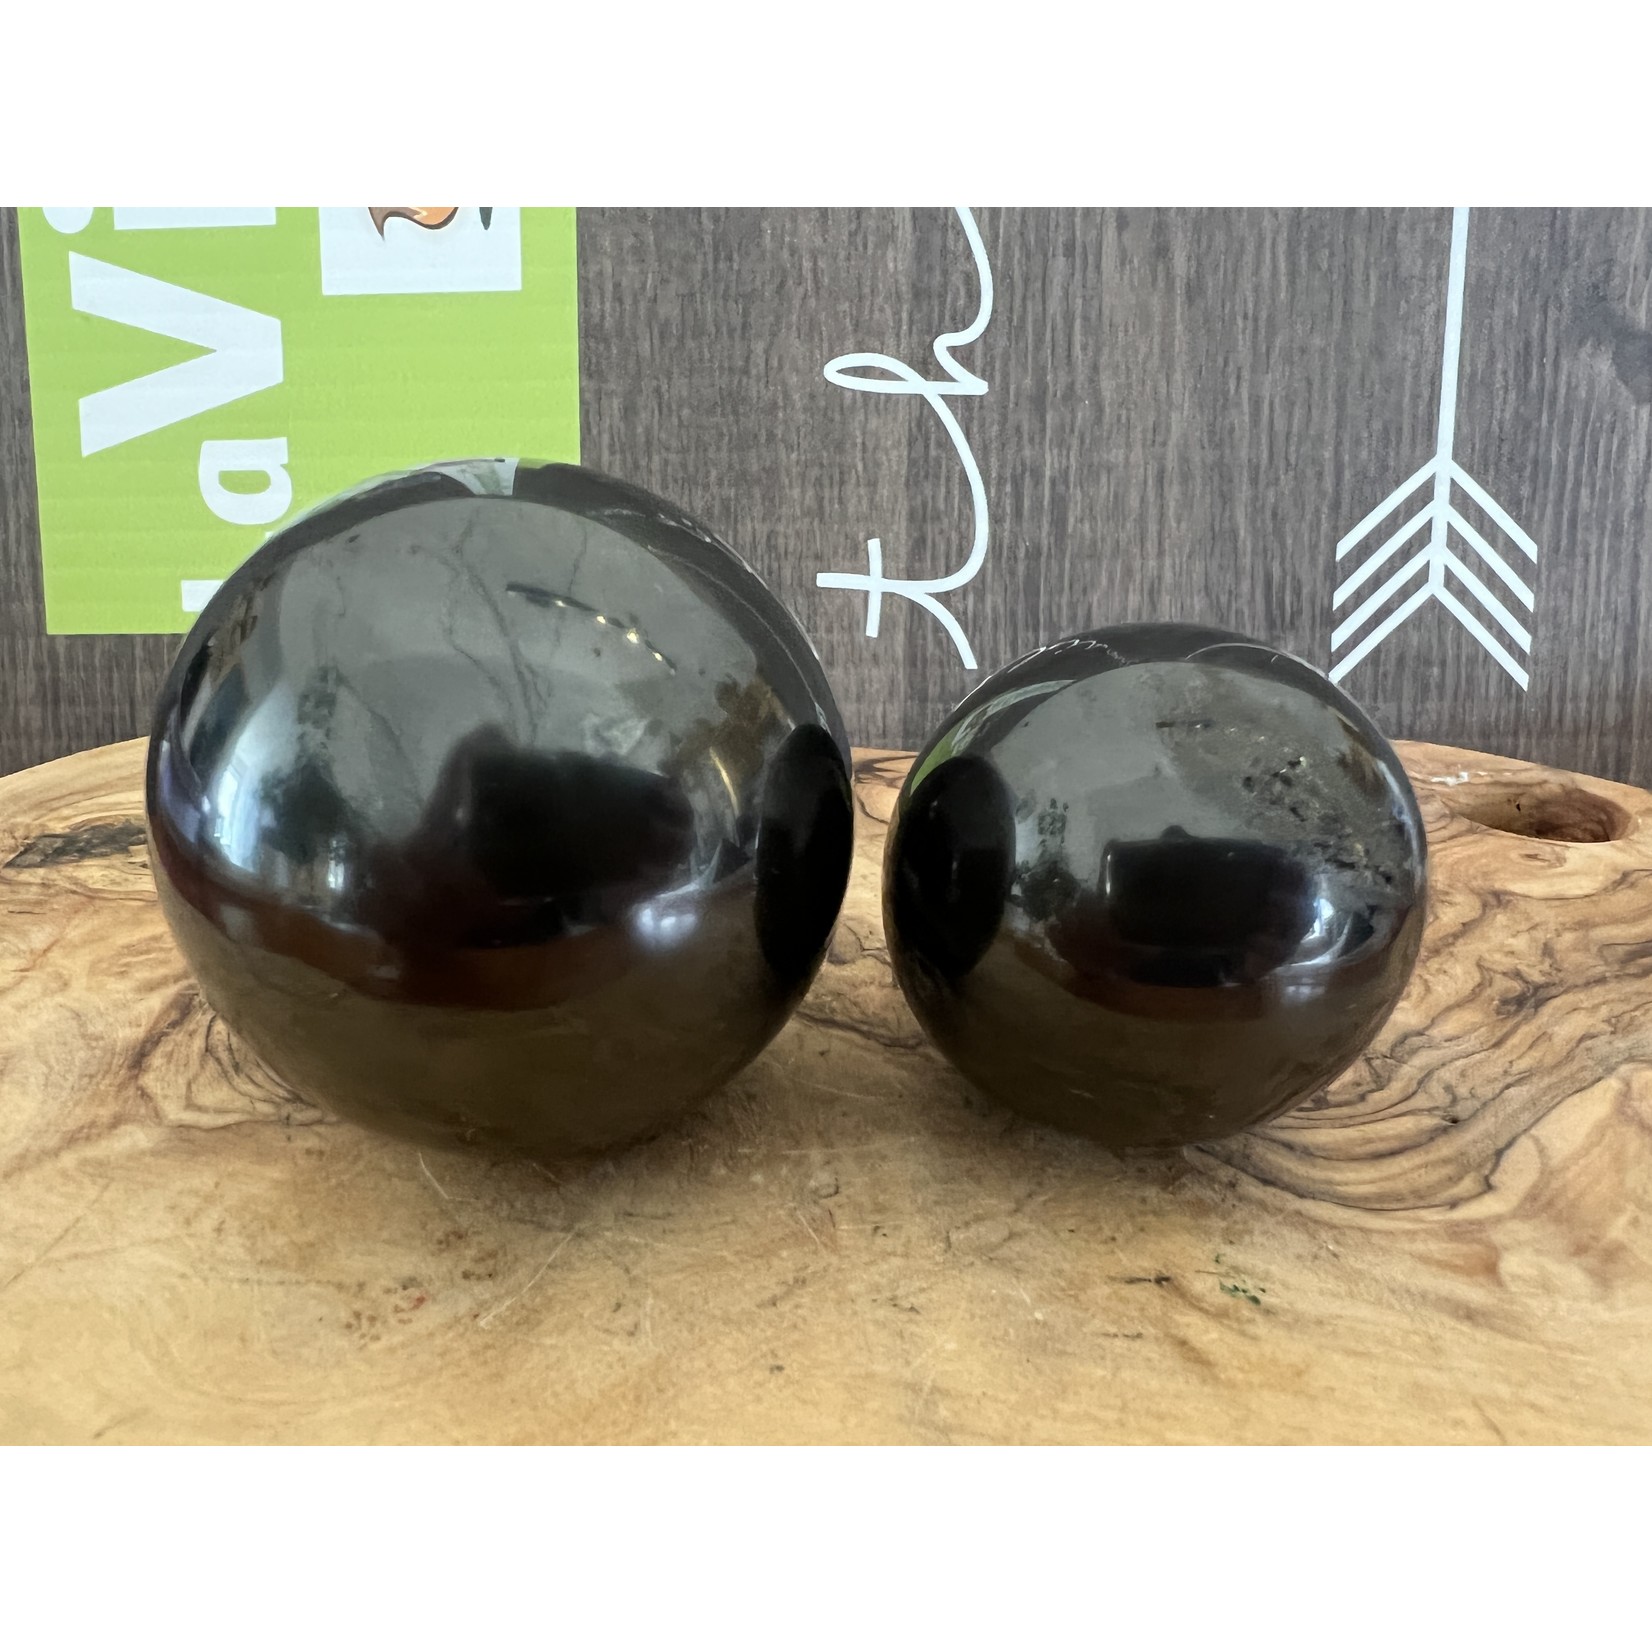 natural shungite sphere, black stone has a unique and remarkable ability, neutralizes electromagnetic disturbances harmful to health